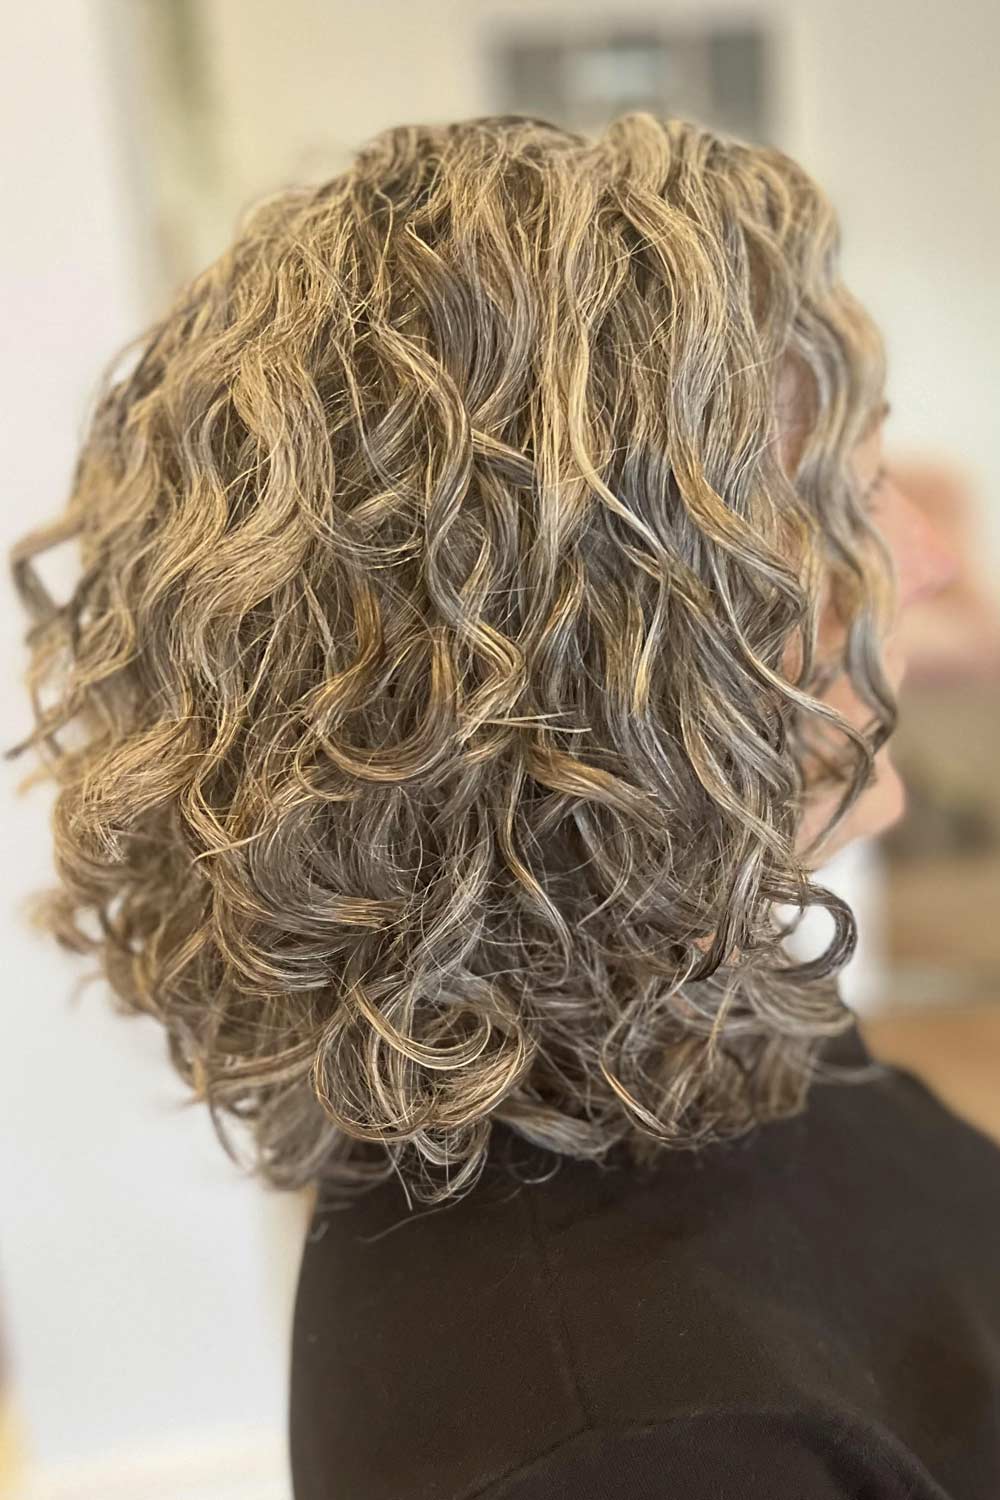 Toning services give life to highlights and faded color.